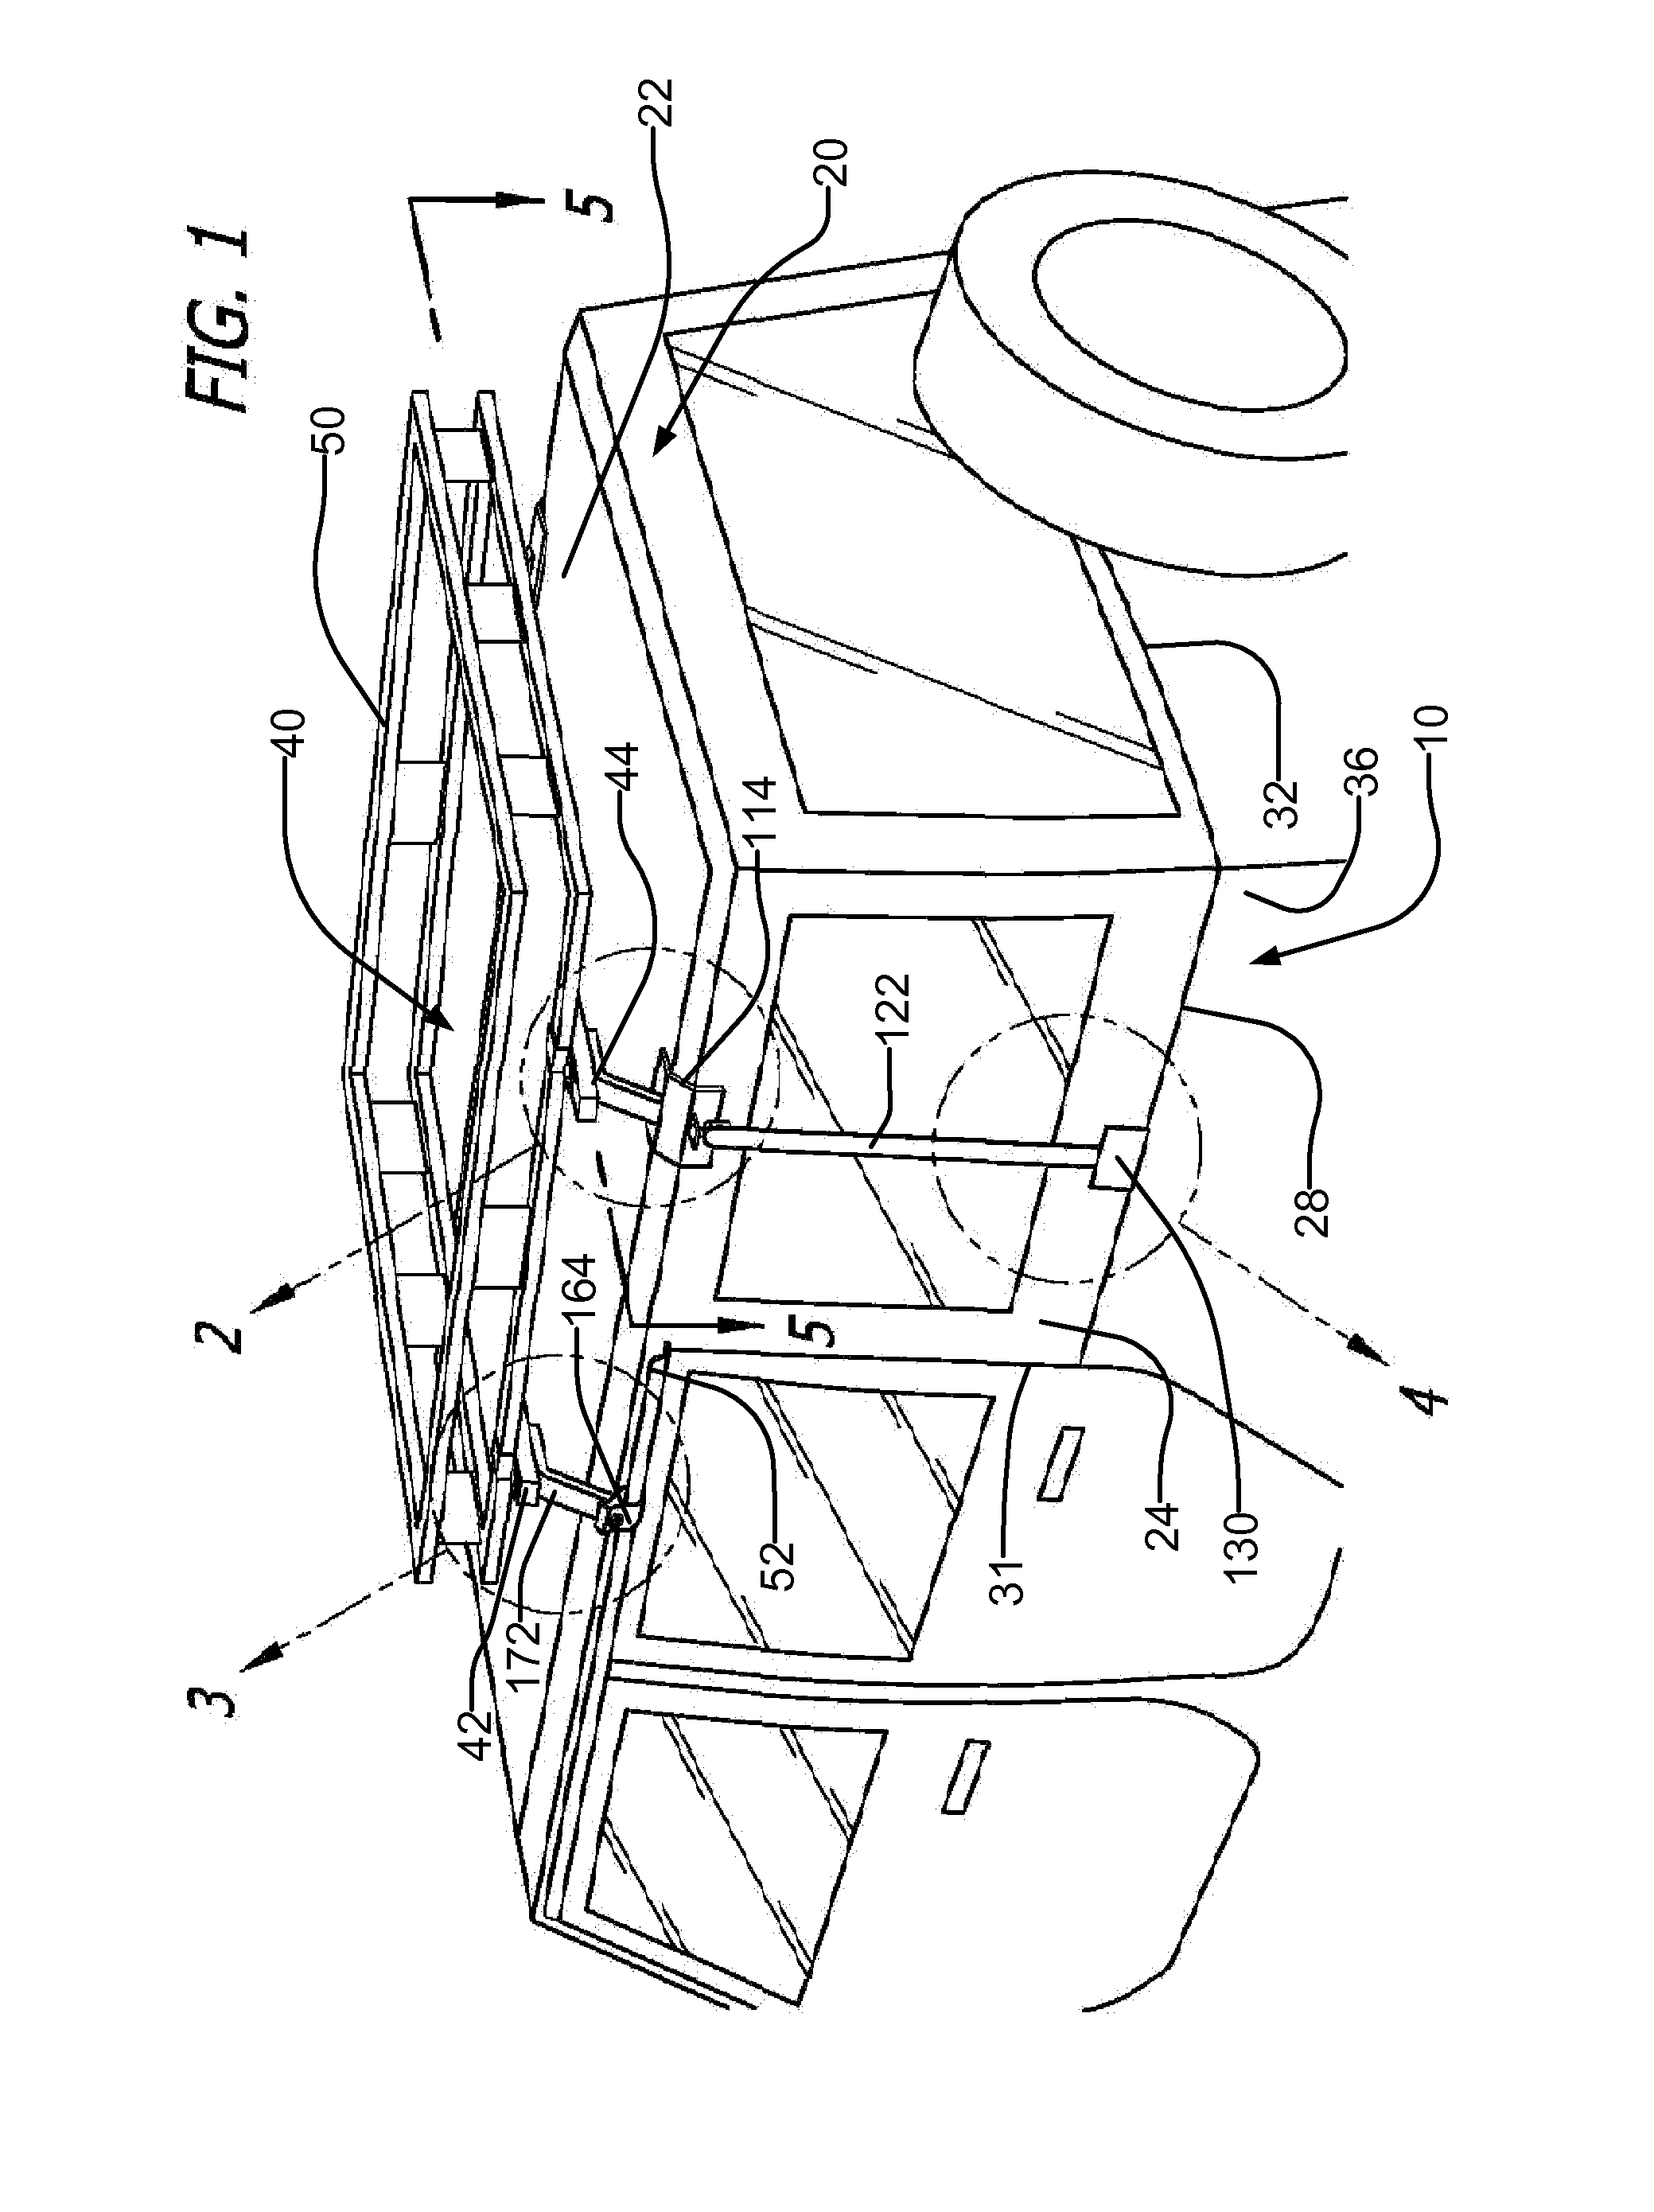 Apparatus for Connecting a Carrier to a Hardtop